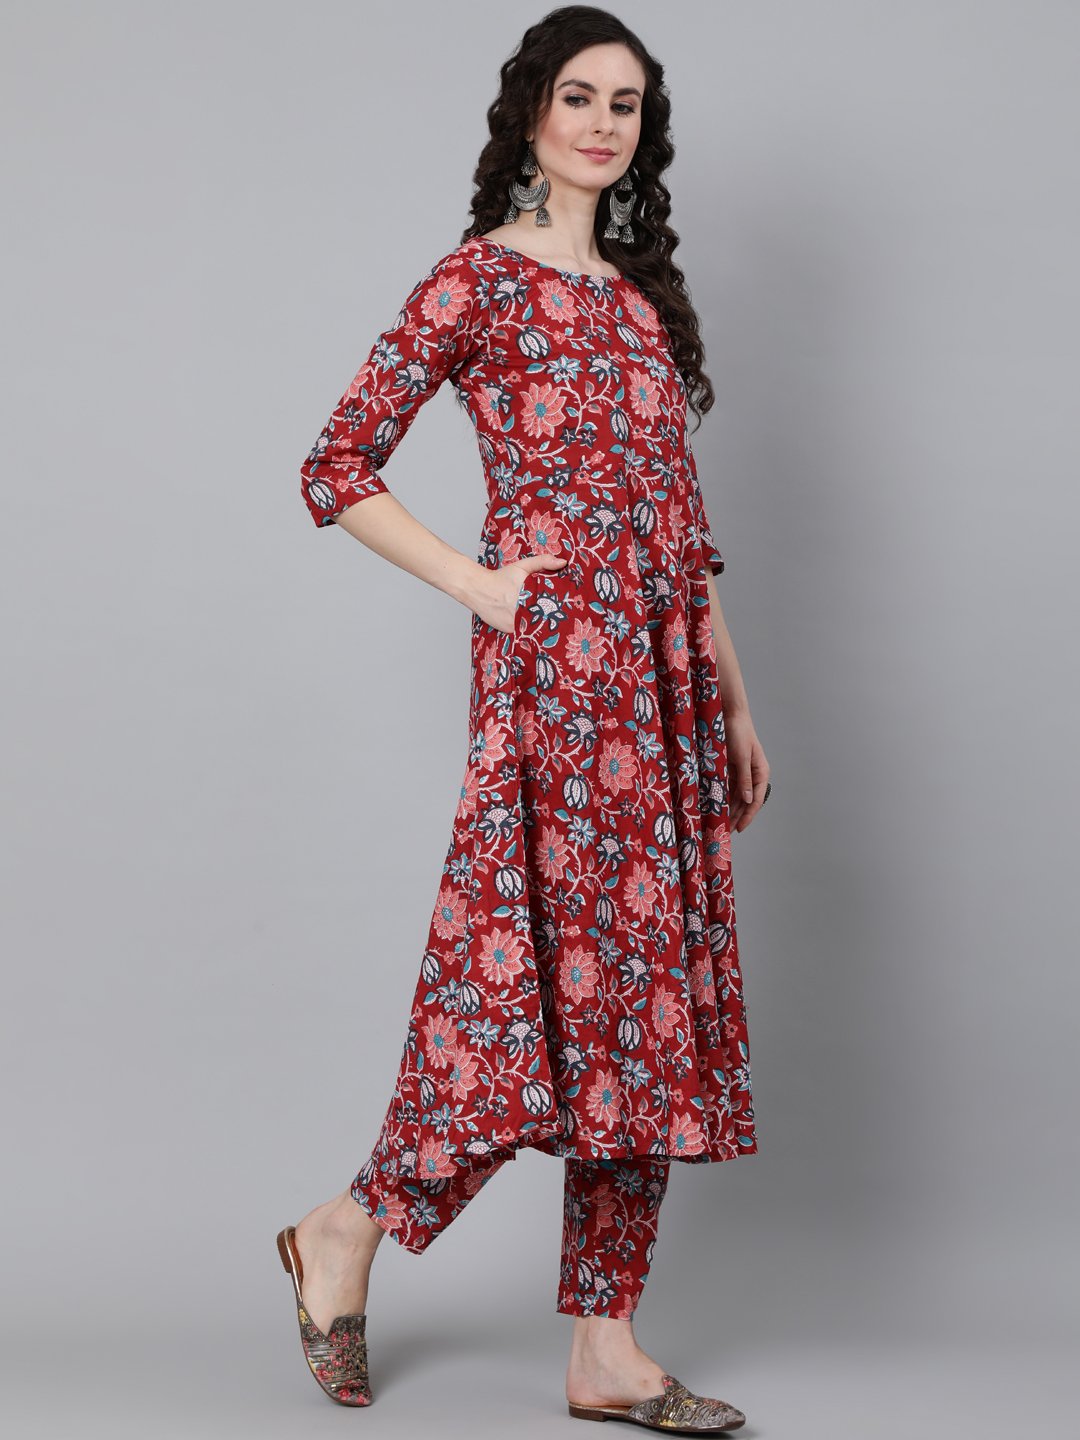 Women's Red Floral Printed Kurta With Trouser & Dupatta - Nayo Clothing USA